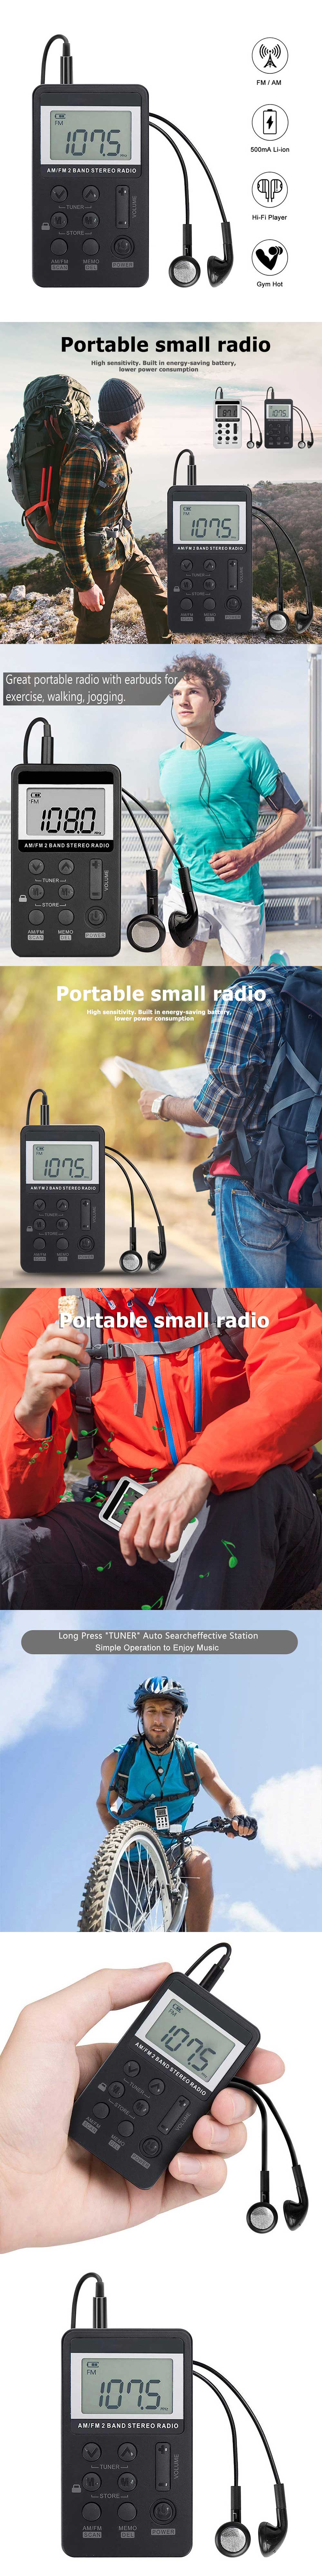 HRD-103 Mini Radio Portable AM/FM Dual Band Receiver Built-in DSP Chip HiFi Stereo LCD Display Rechargeable Pocket Radio